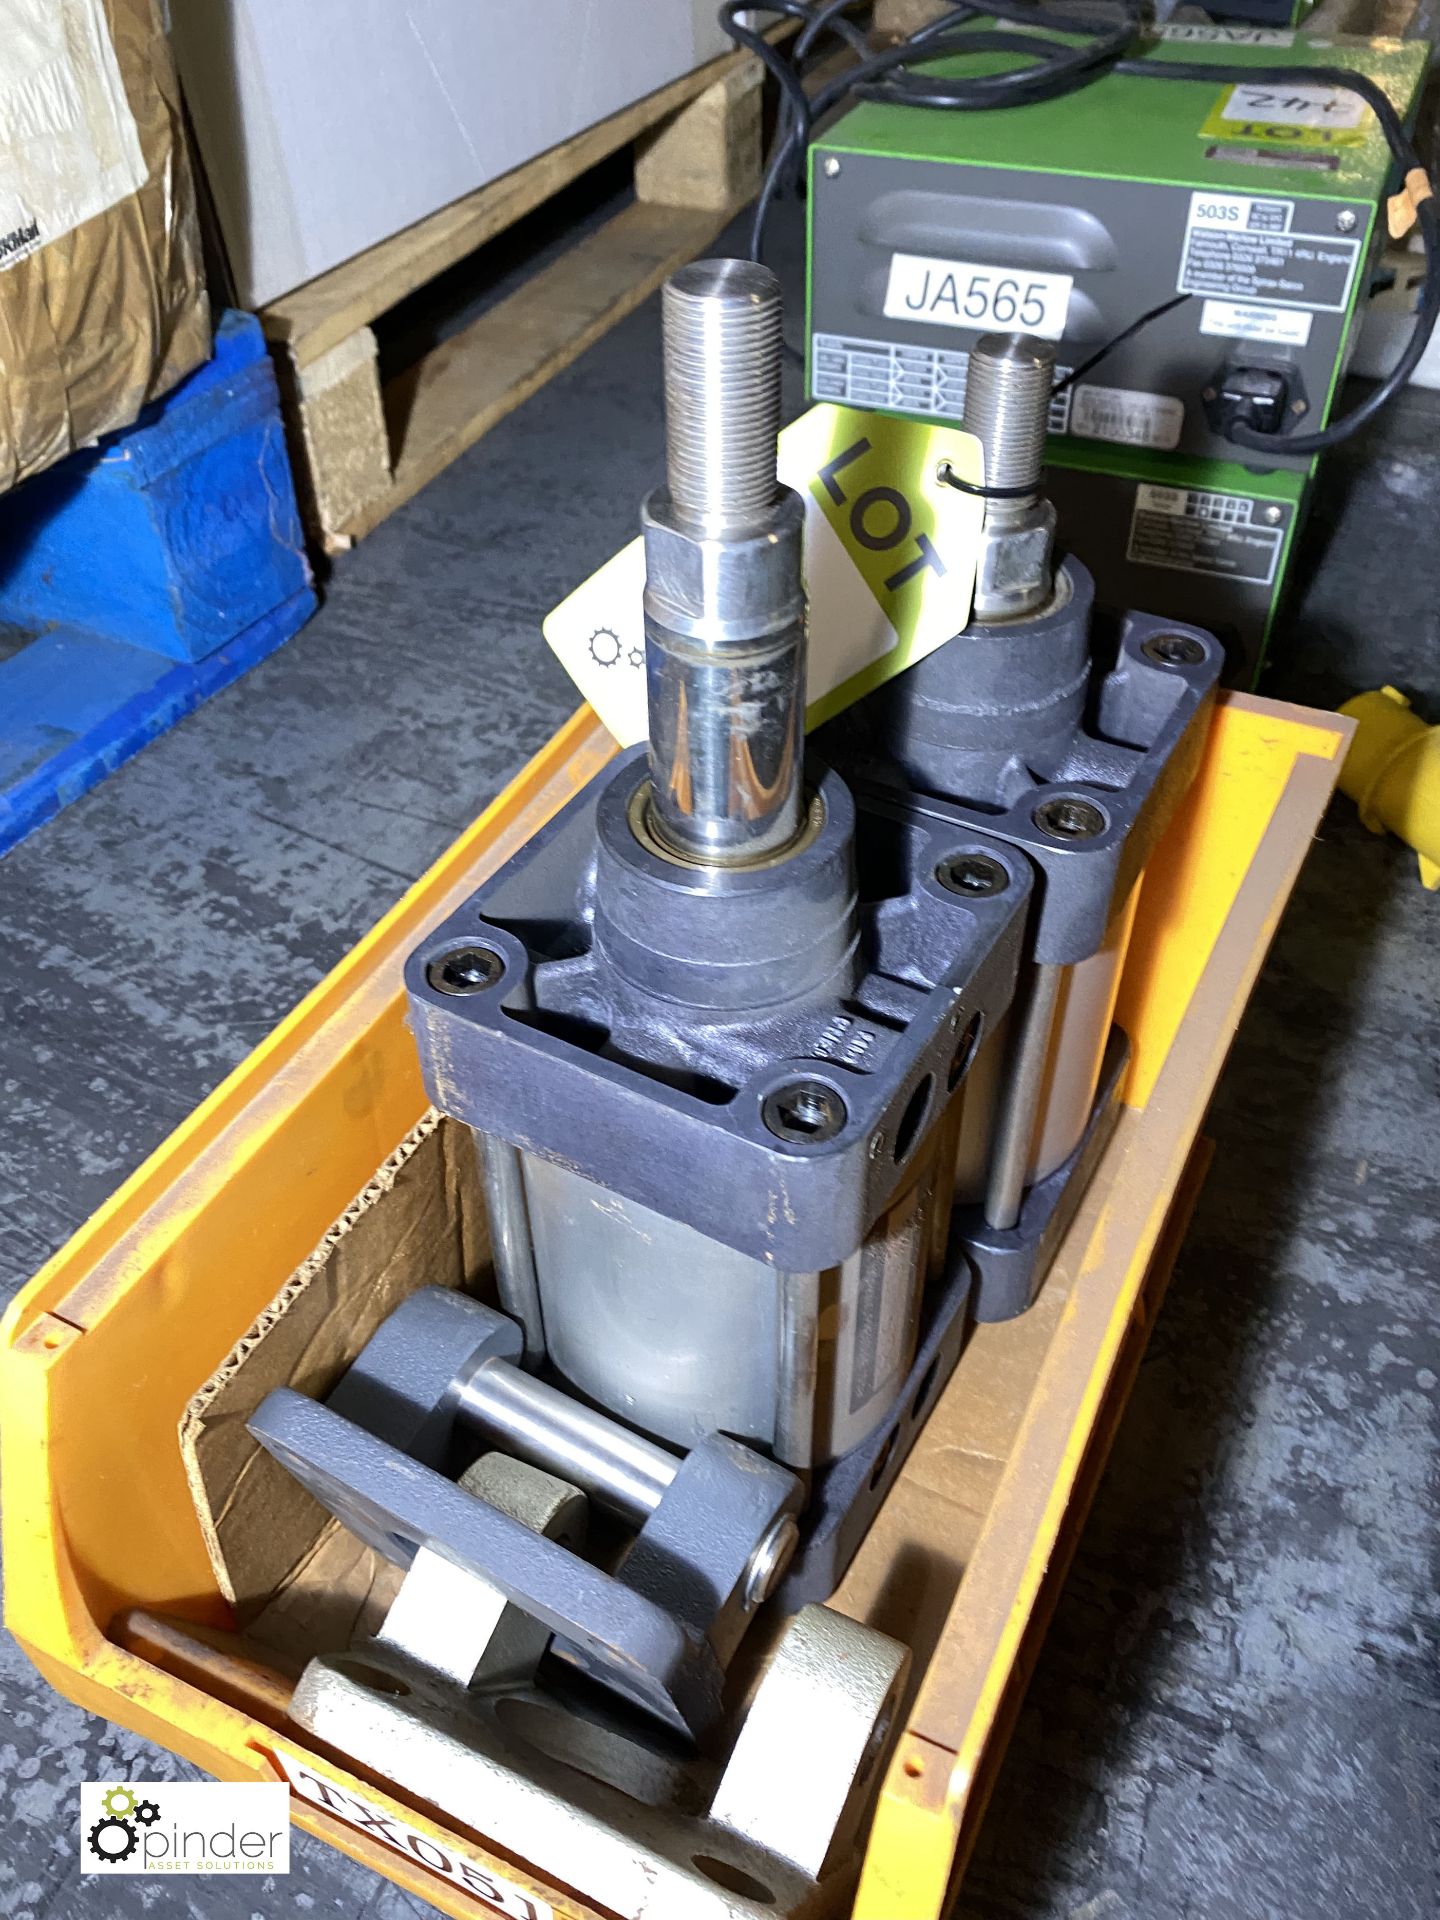 2 Midland Pneumatic Cylinders 100 INS AMB 0050 pneumatic Cylinders (please note there is a lift